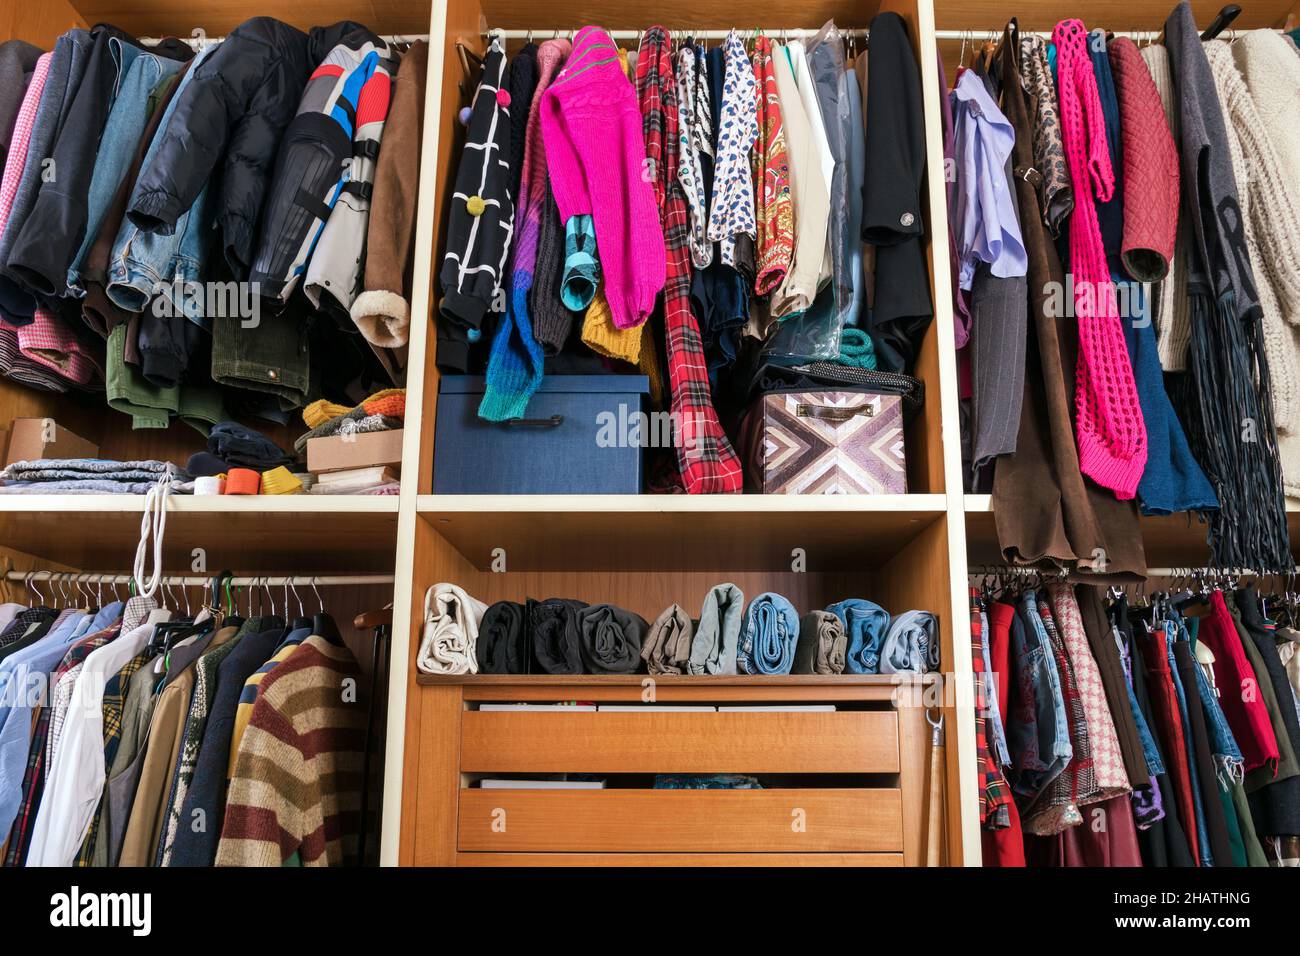 https://c8.alamy.com/comp/2HATHNG/collection-of-multicolored-assorted-clothes-placed-accurately-on-rails-and-hangers-with-shelves-in-walk-in-closet-2HATHNG.jpg